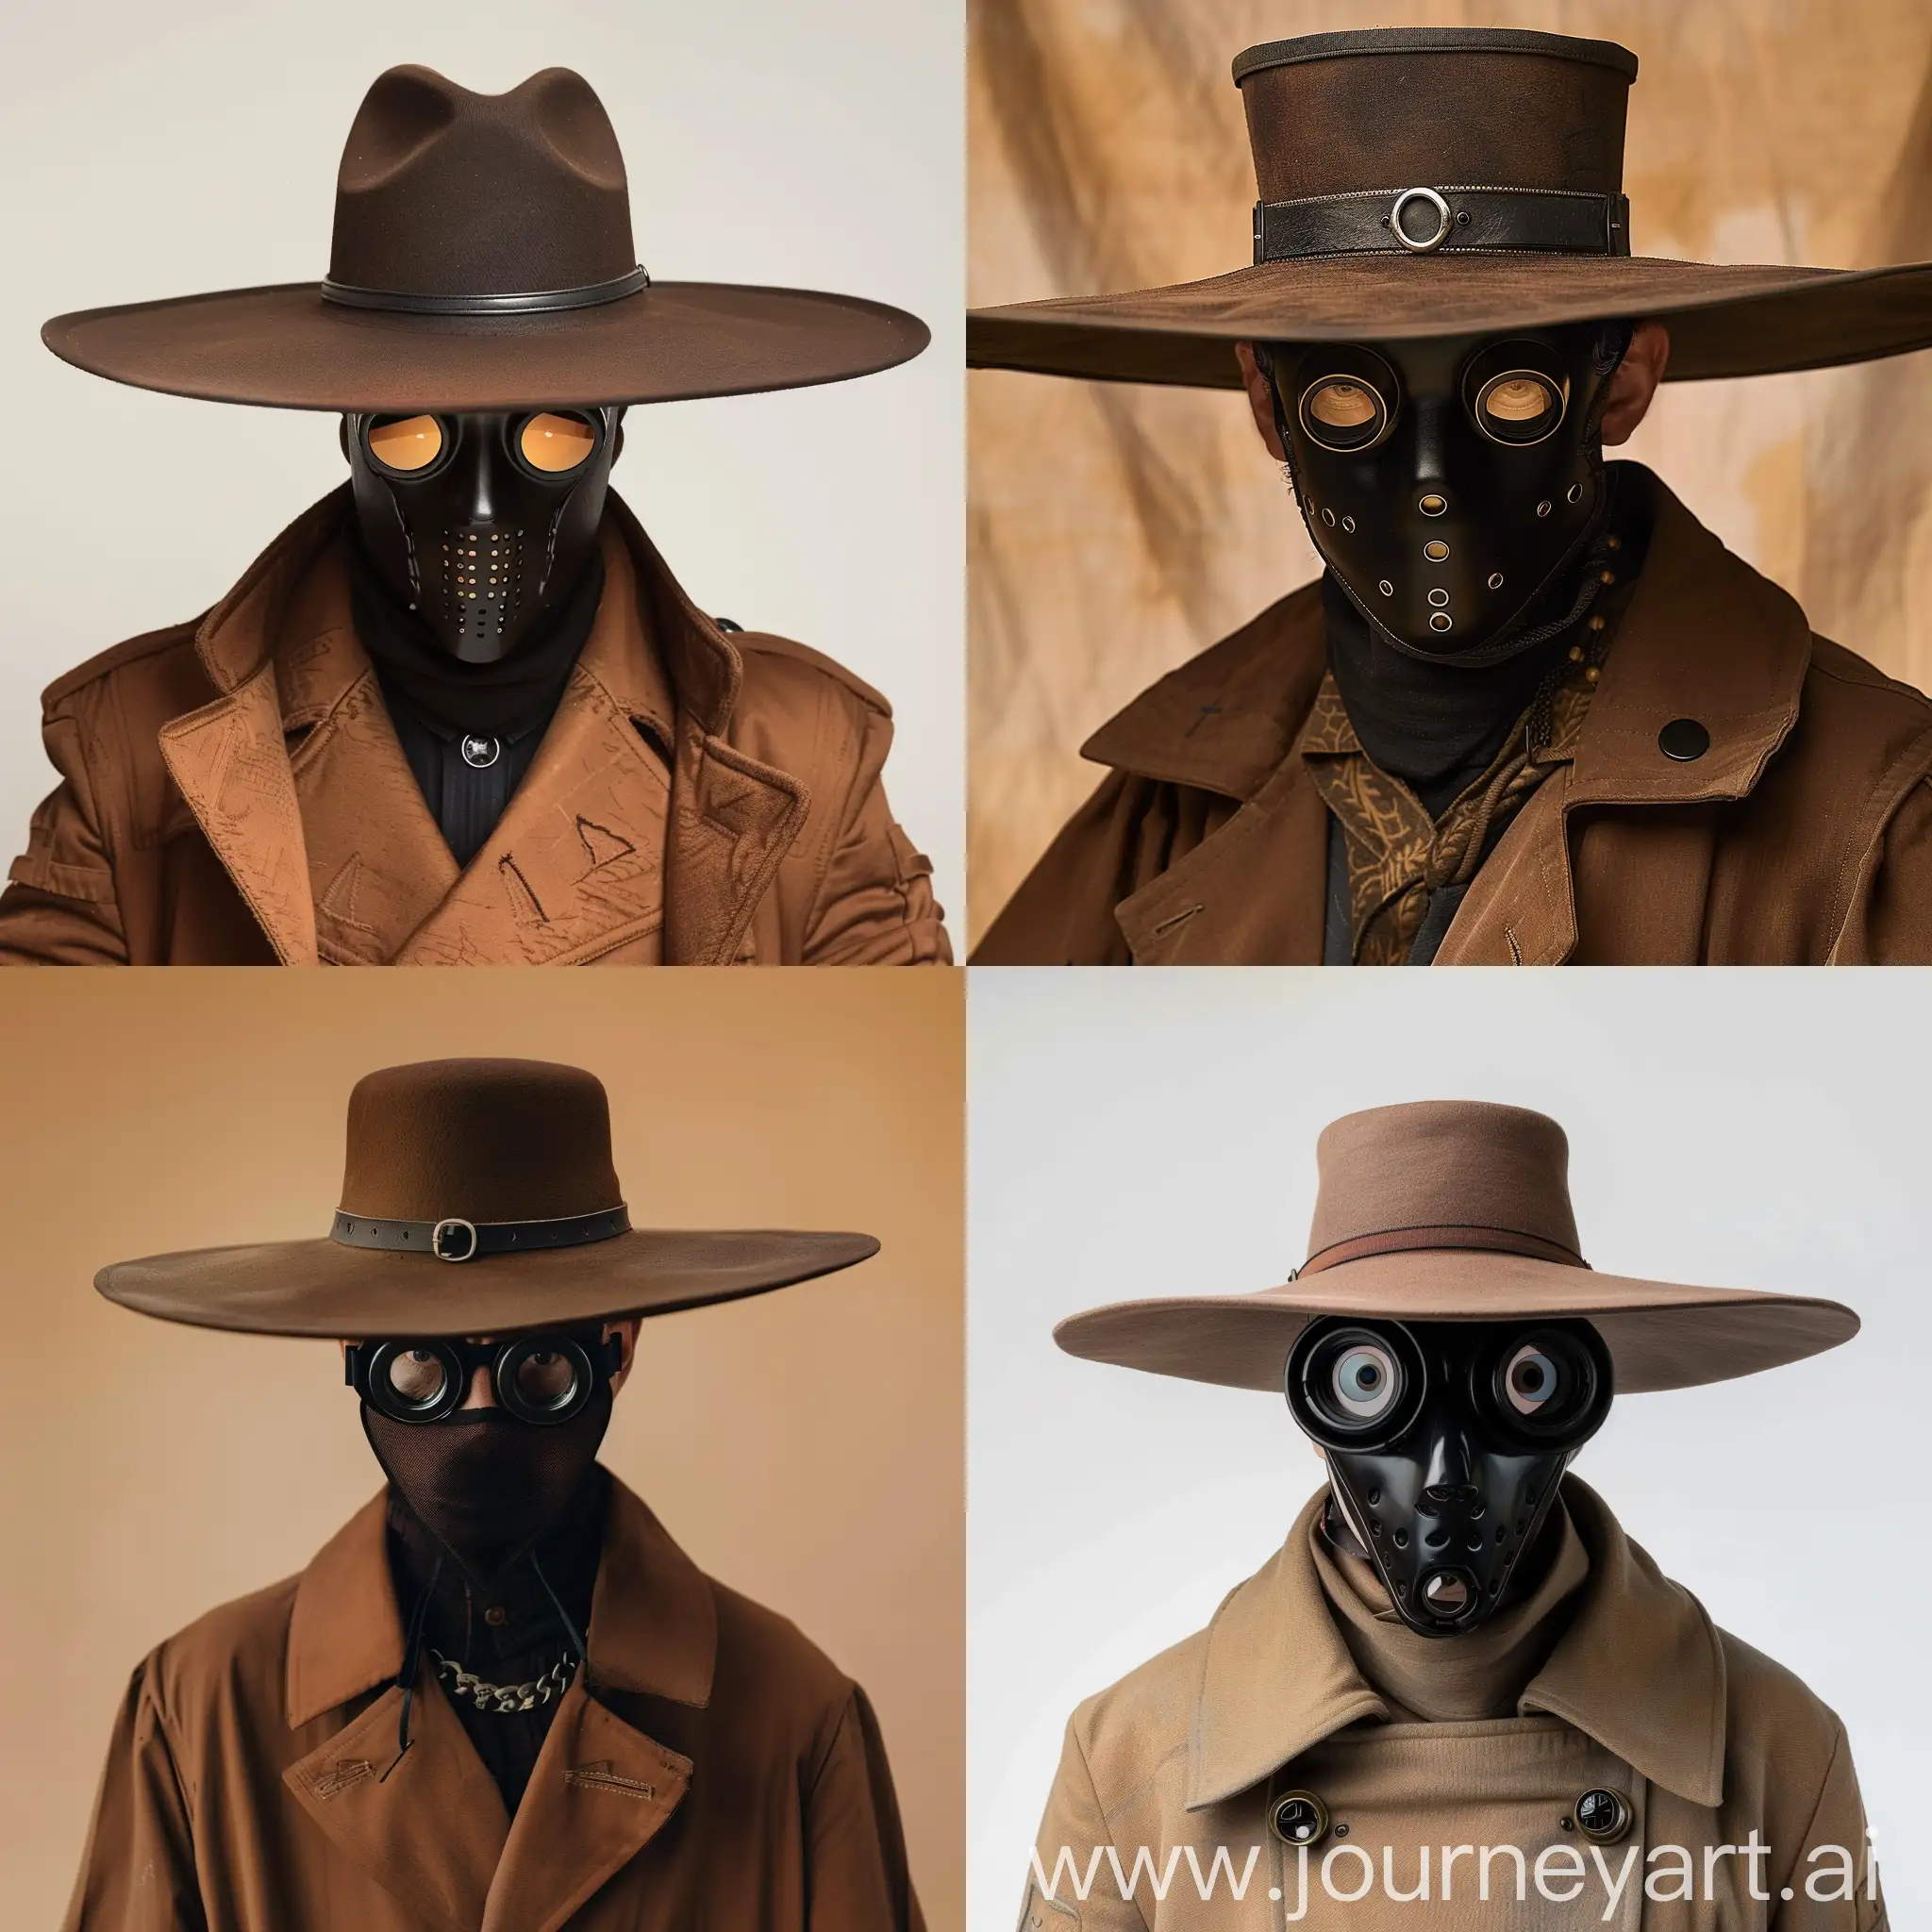 Mysterious-Man-in-Black-Mask-and-Brown-WideBrimmed-Hat-and-Coat